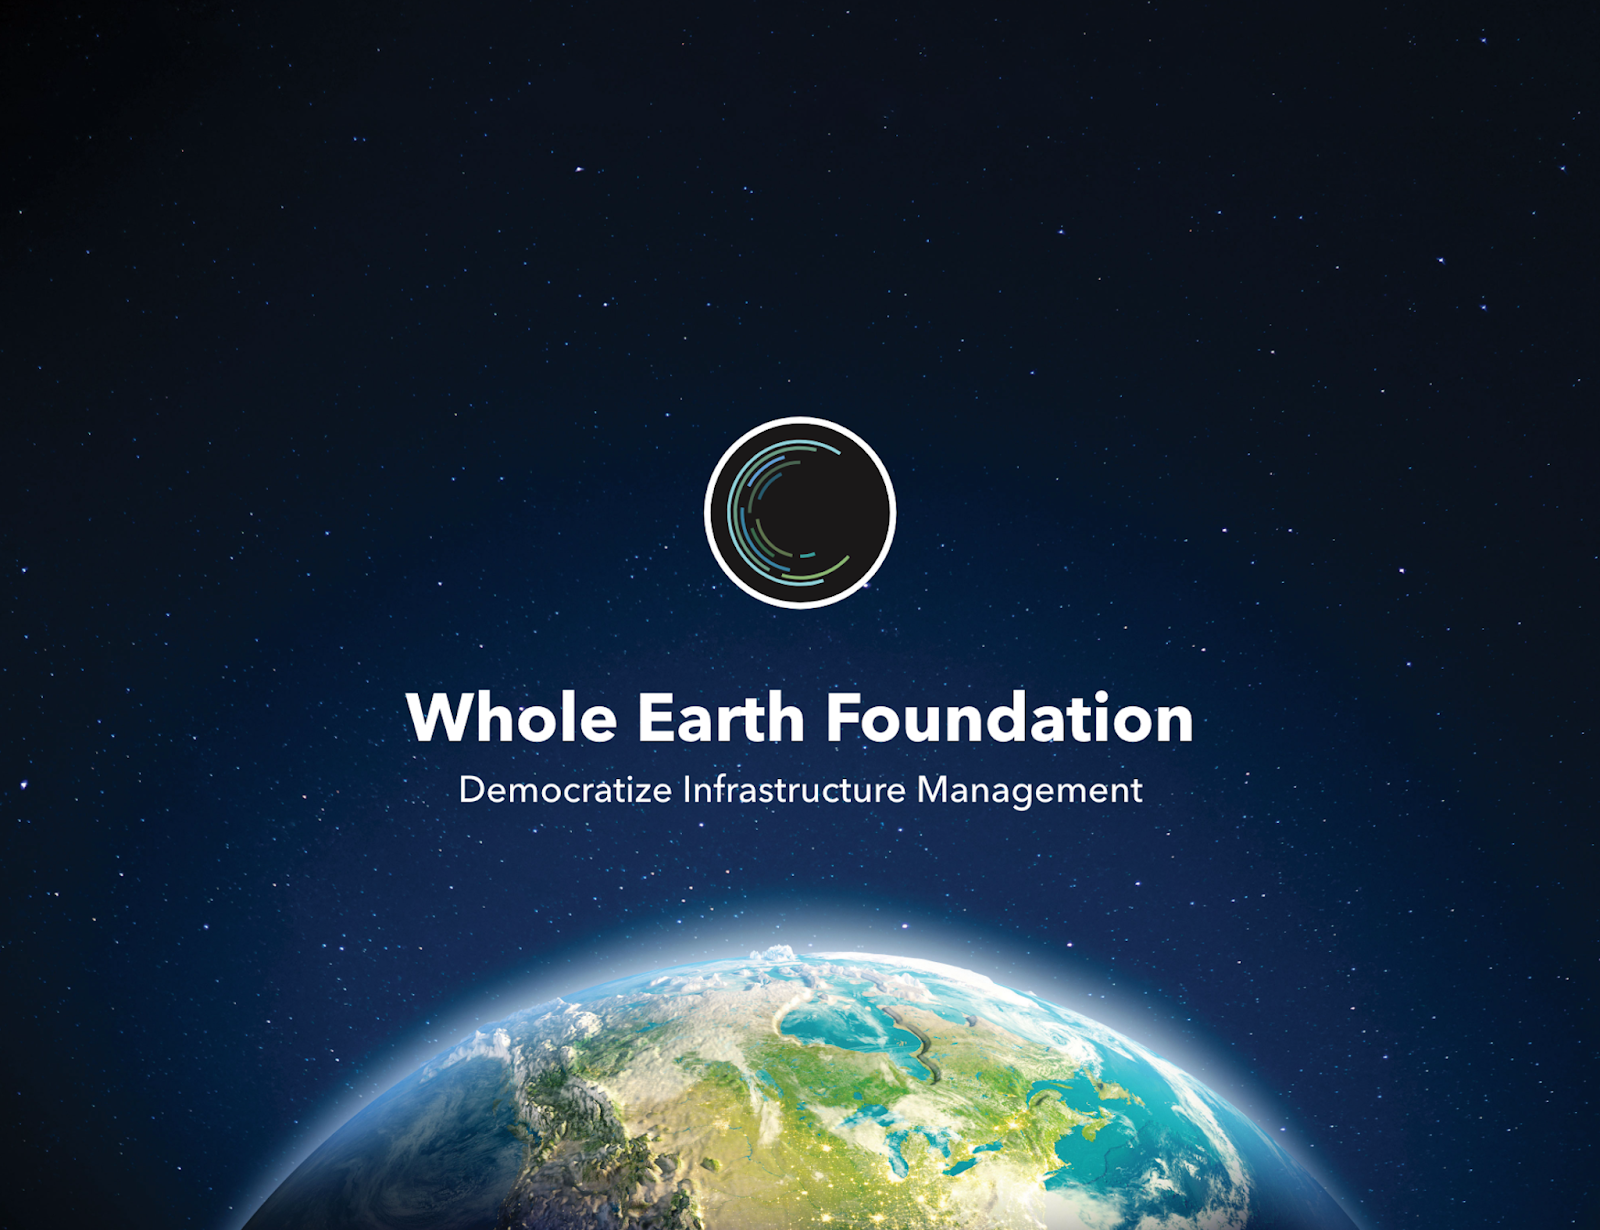 Whole Earth Coins: A Digital Incentive for Crowdsourcing Infrastructure Data